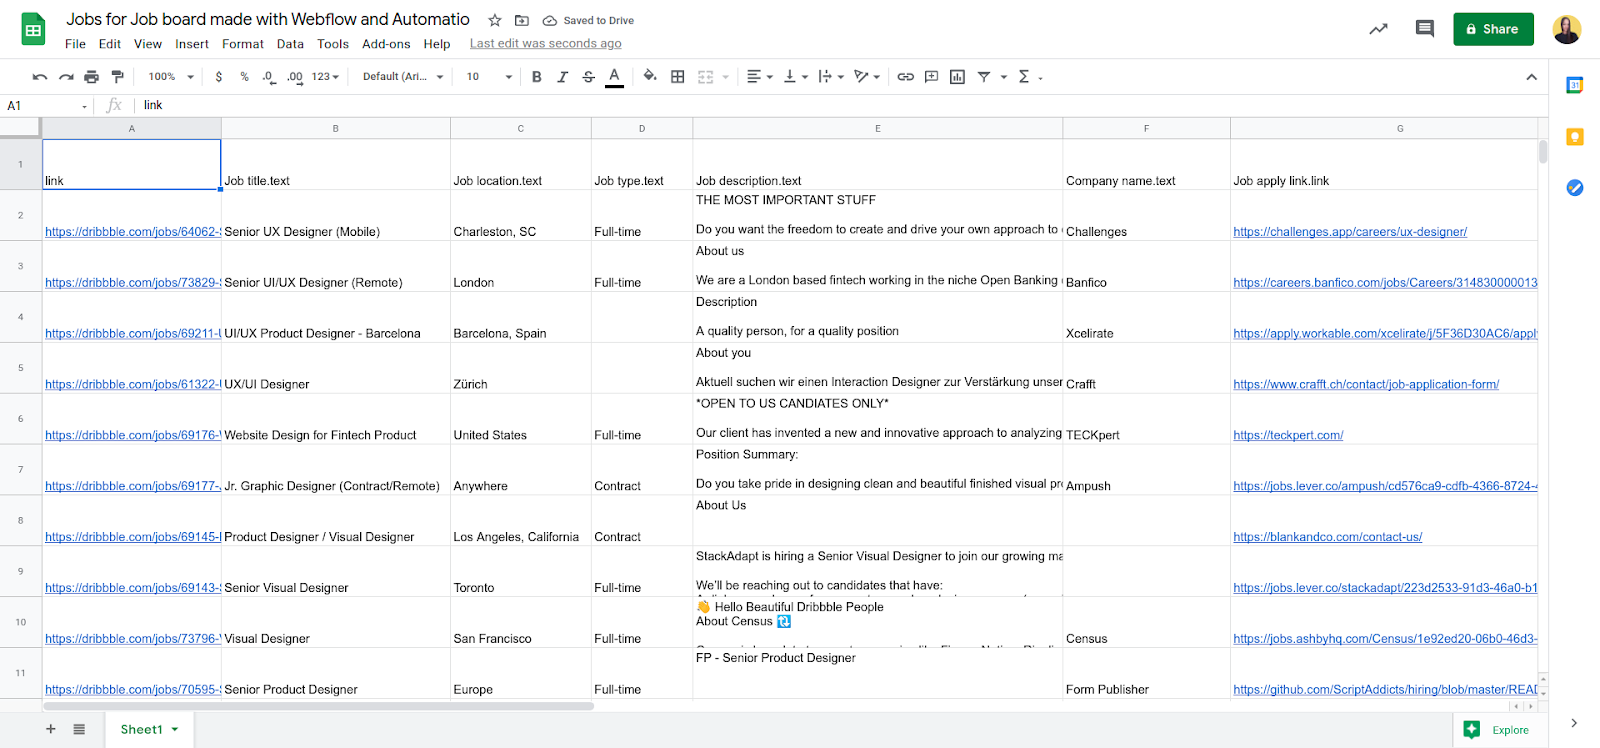 How to create a fully automated job board using no-code tools (Automatio + Webflow + Google Sheets + Zapier)